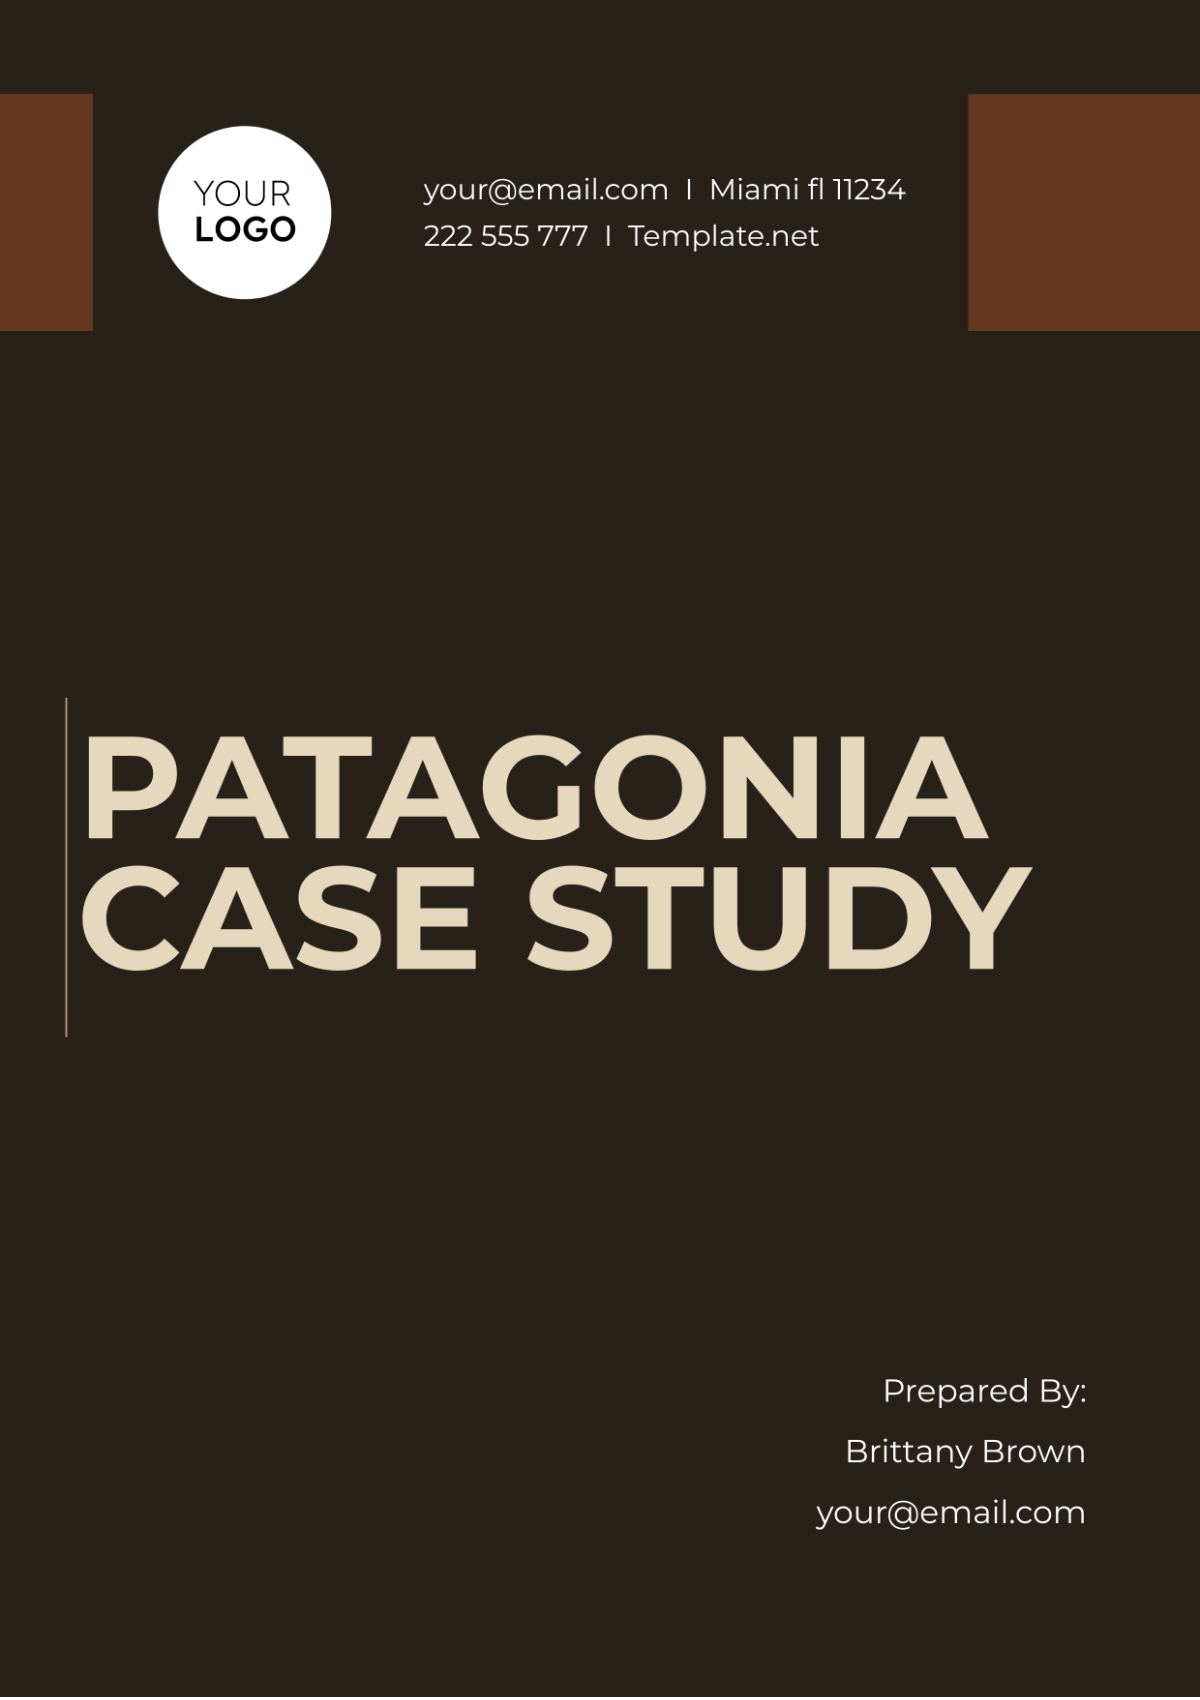 Patagonia Case Study Template